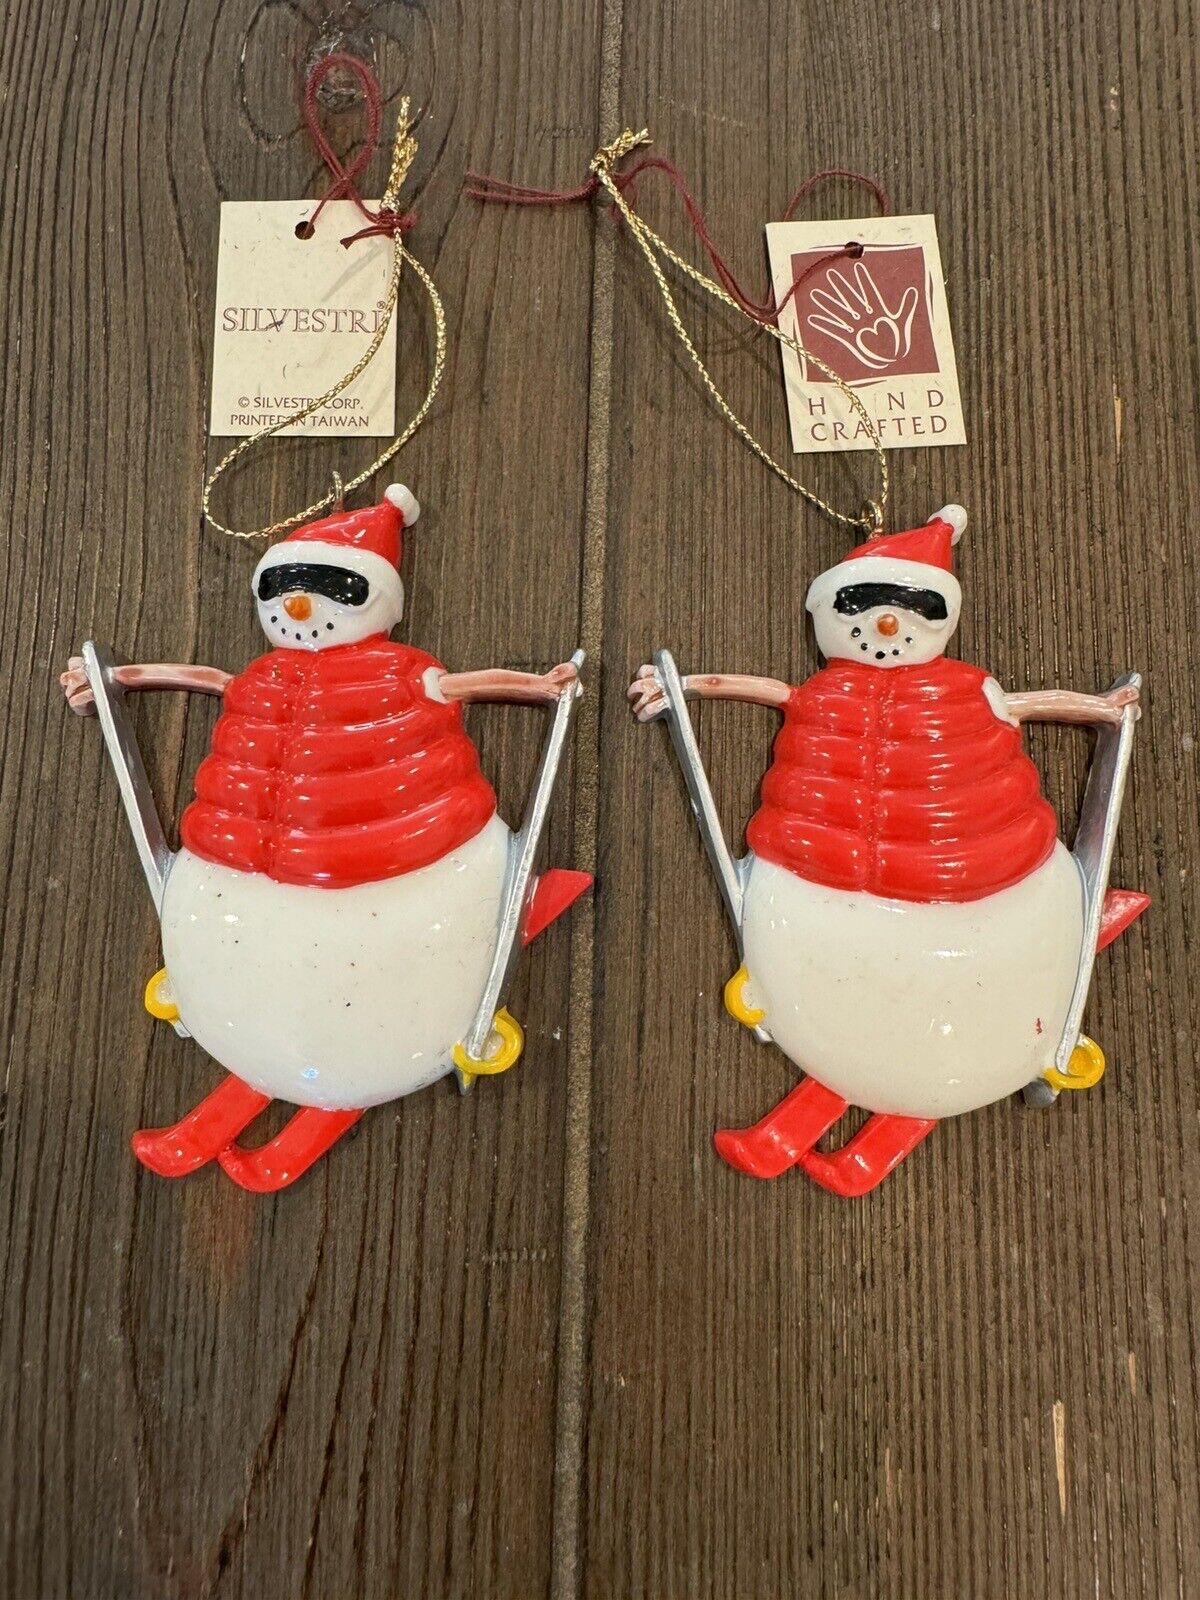 Vintage Silverstri Snowman Skiing Ornaments Lot Of 2 Hand Crafted  4”